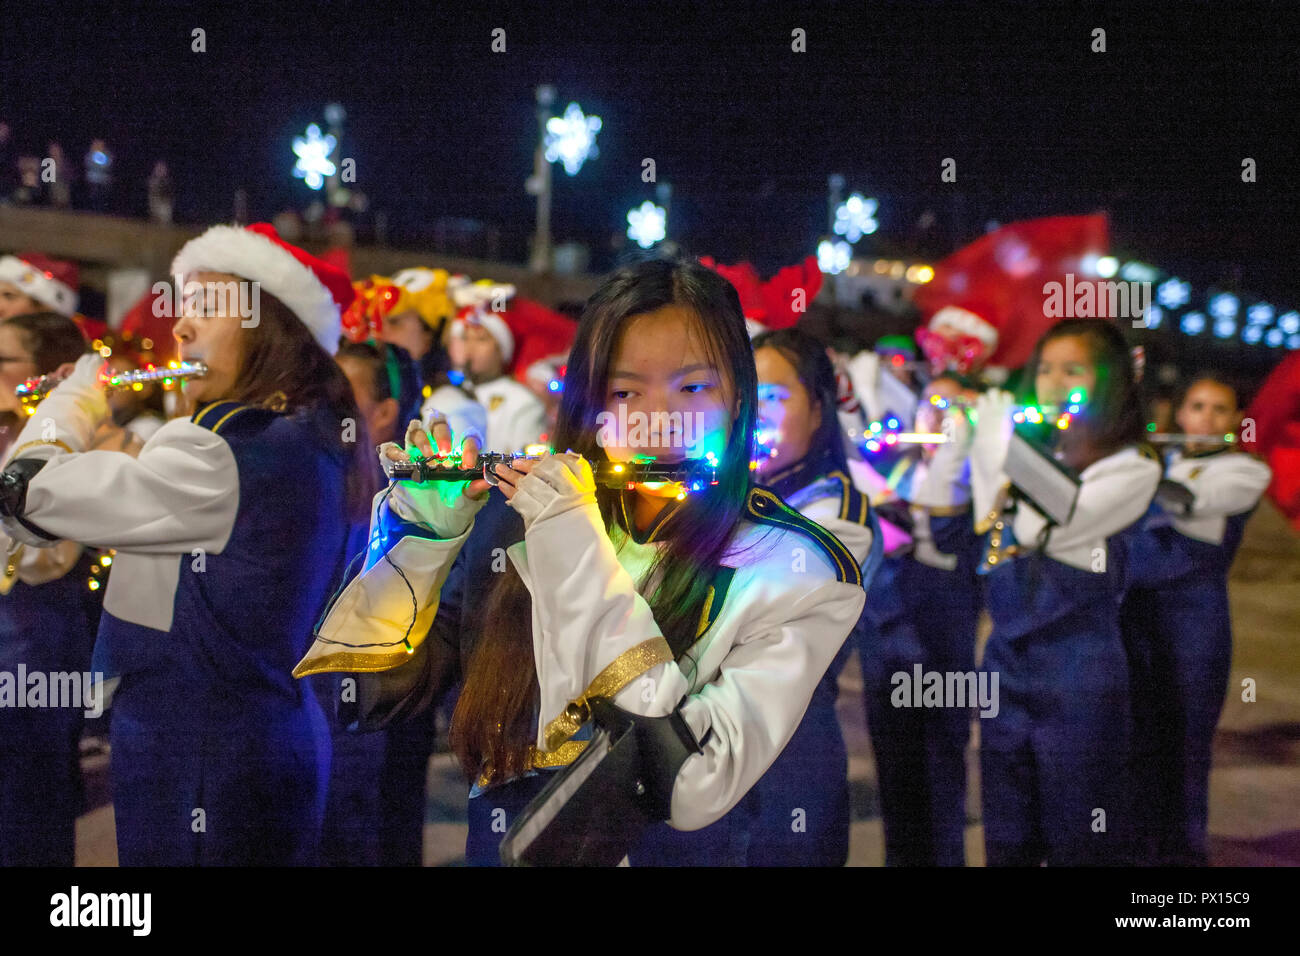 An Asian American uniformed high school band flutist plays with fellow band  members at a Christmas celebration in Huntington Beach, CA, as illuminated  Christmas stars are lit on the pier in the